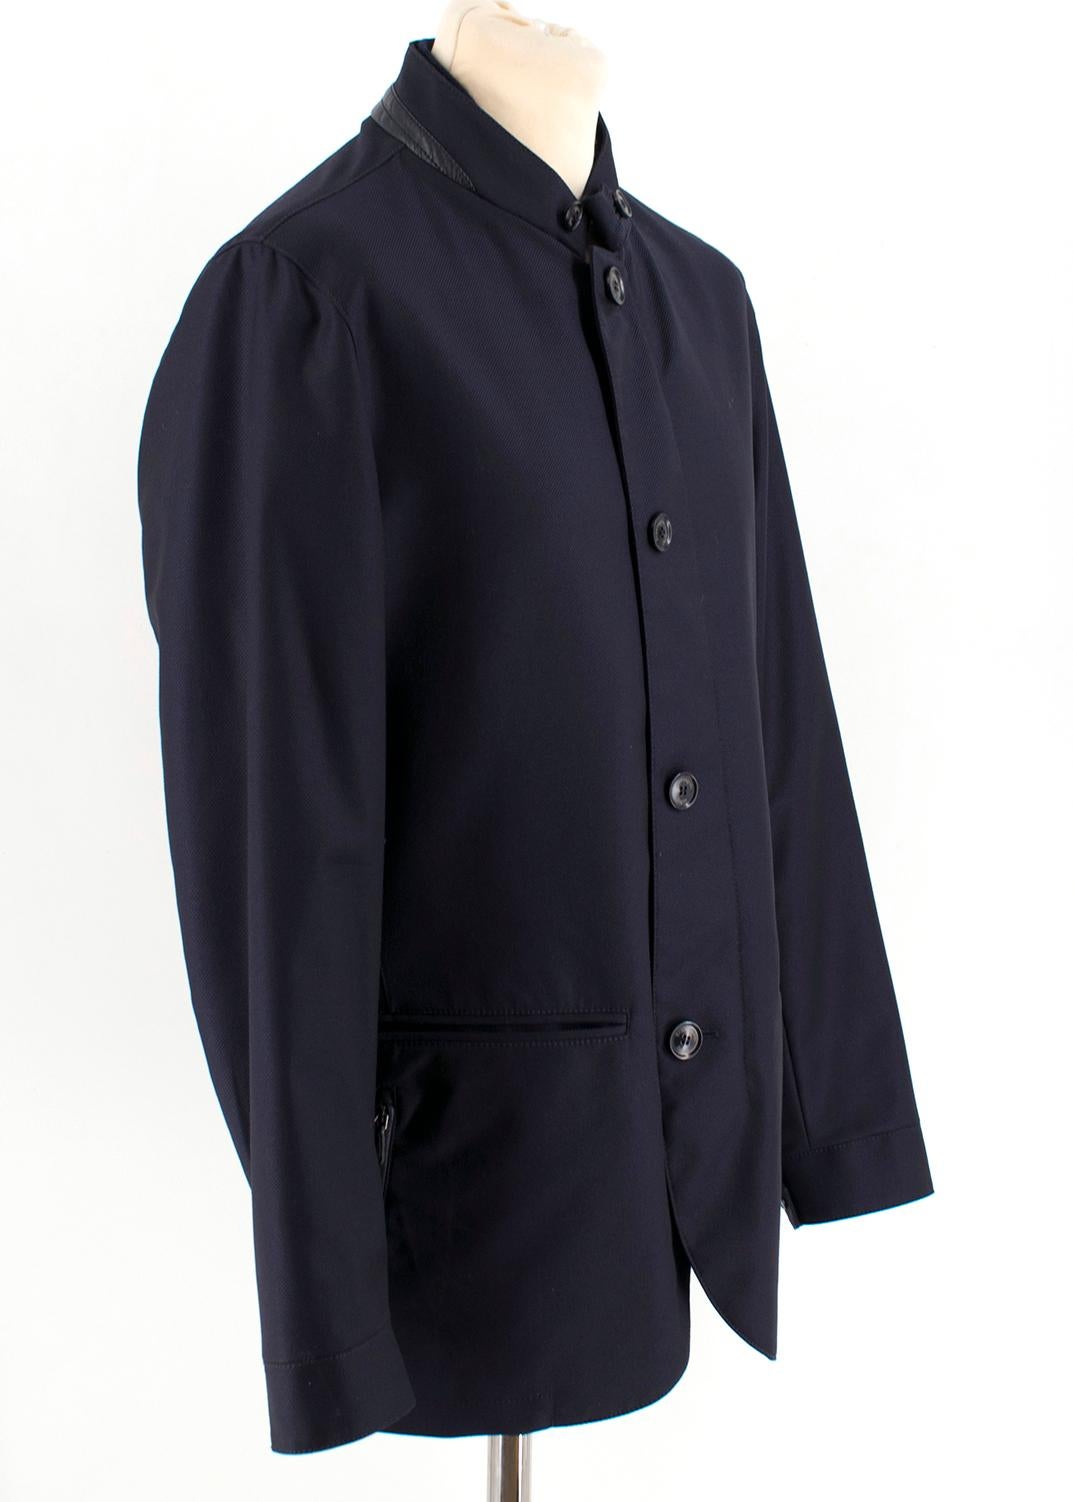 Ermenegildo Zegna elements navy blue wool jacket

details 100% leather;
inside part 100% virgin wool;
lining sleeves 100% polyester;
padding 100% polyester;
zip and button closure;
two front pockets;
two side pockets;

Please note, these items are